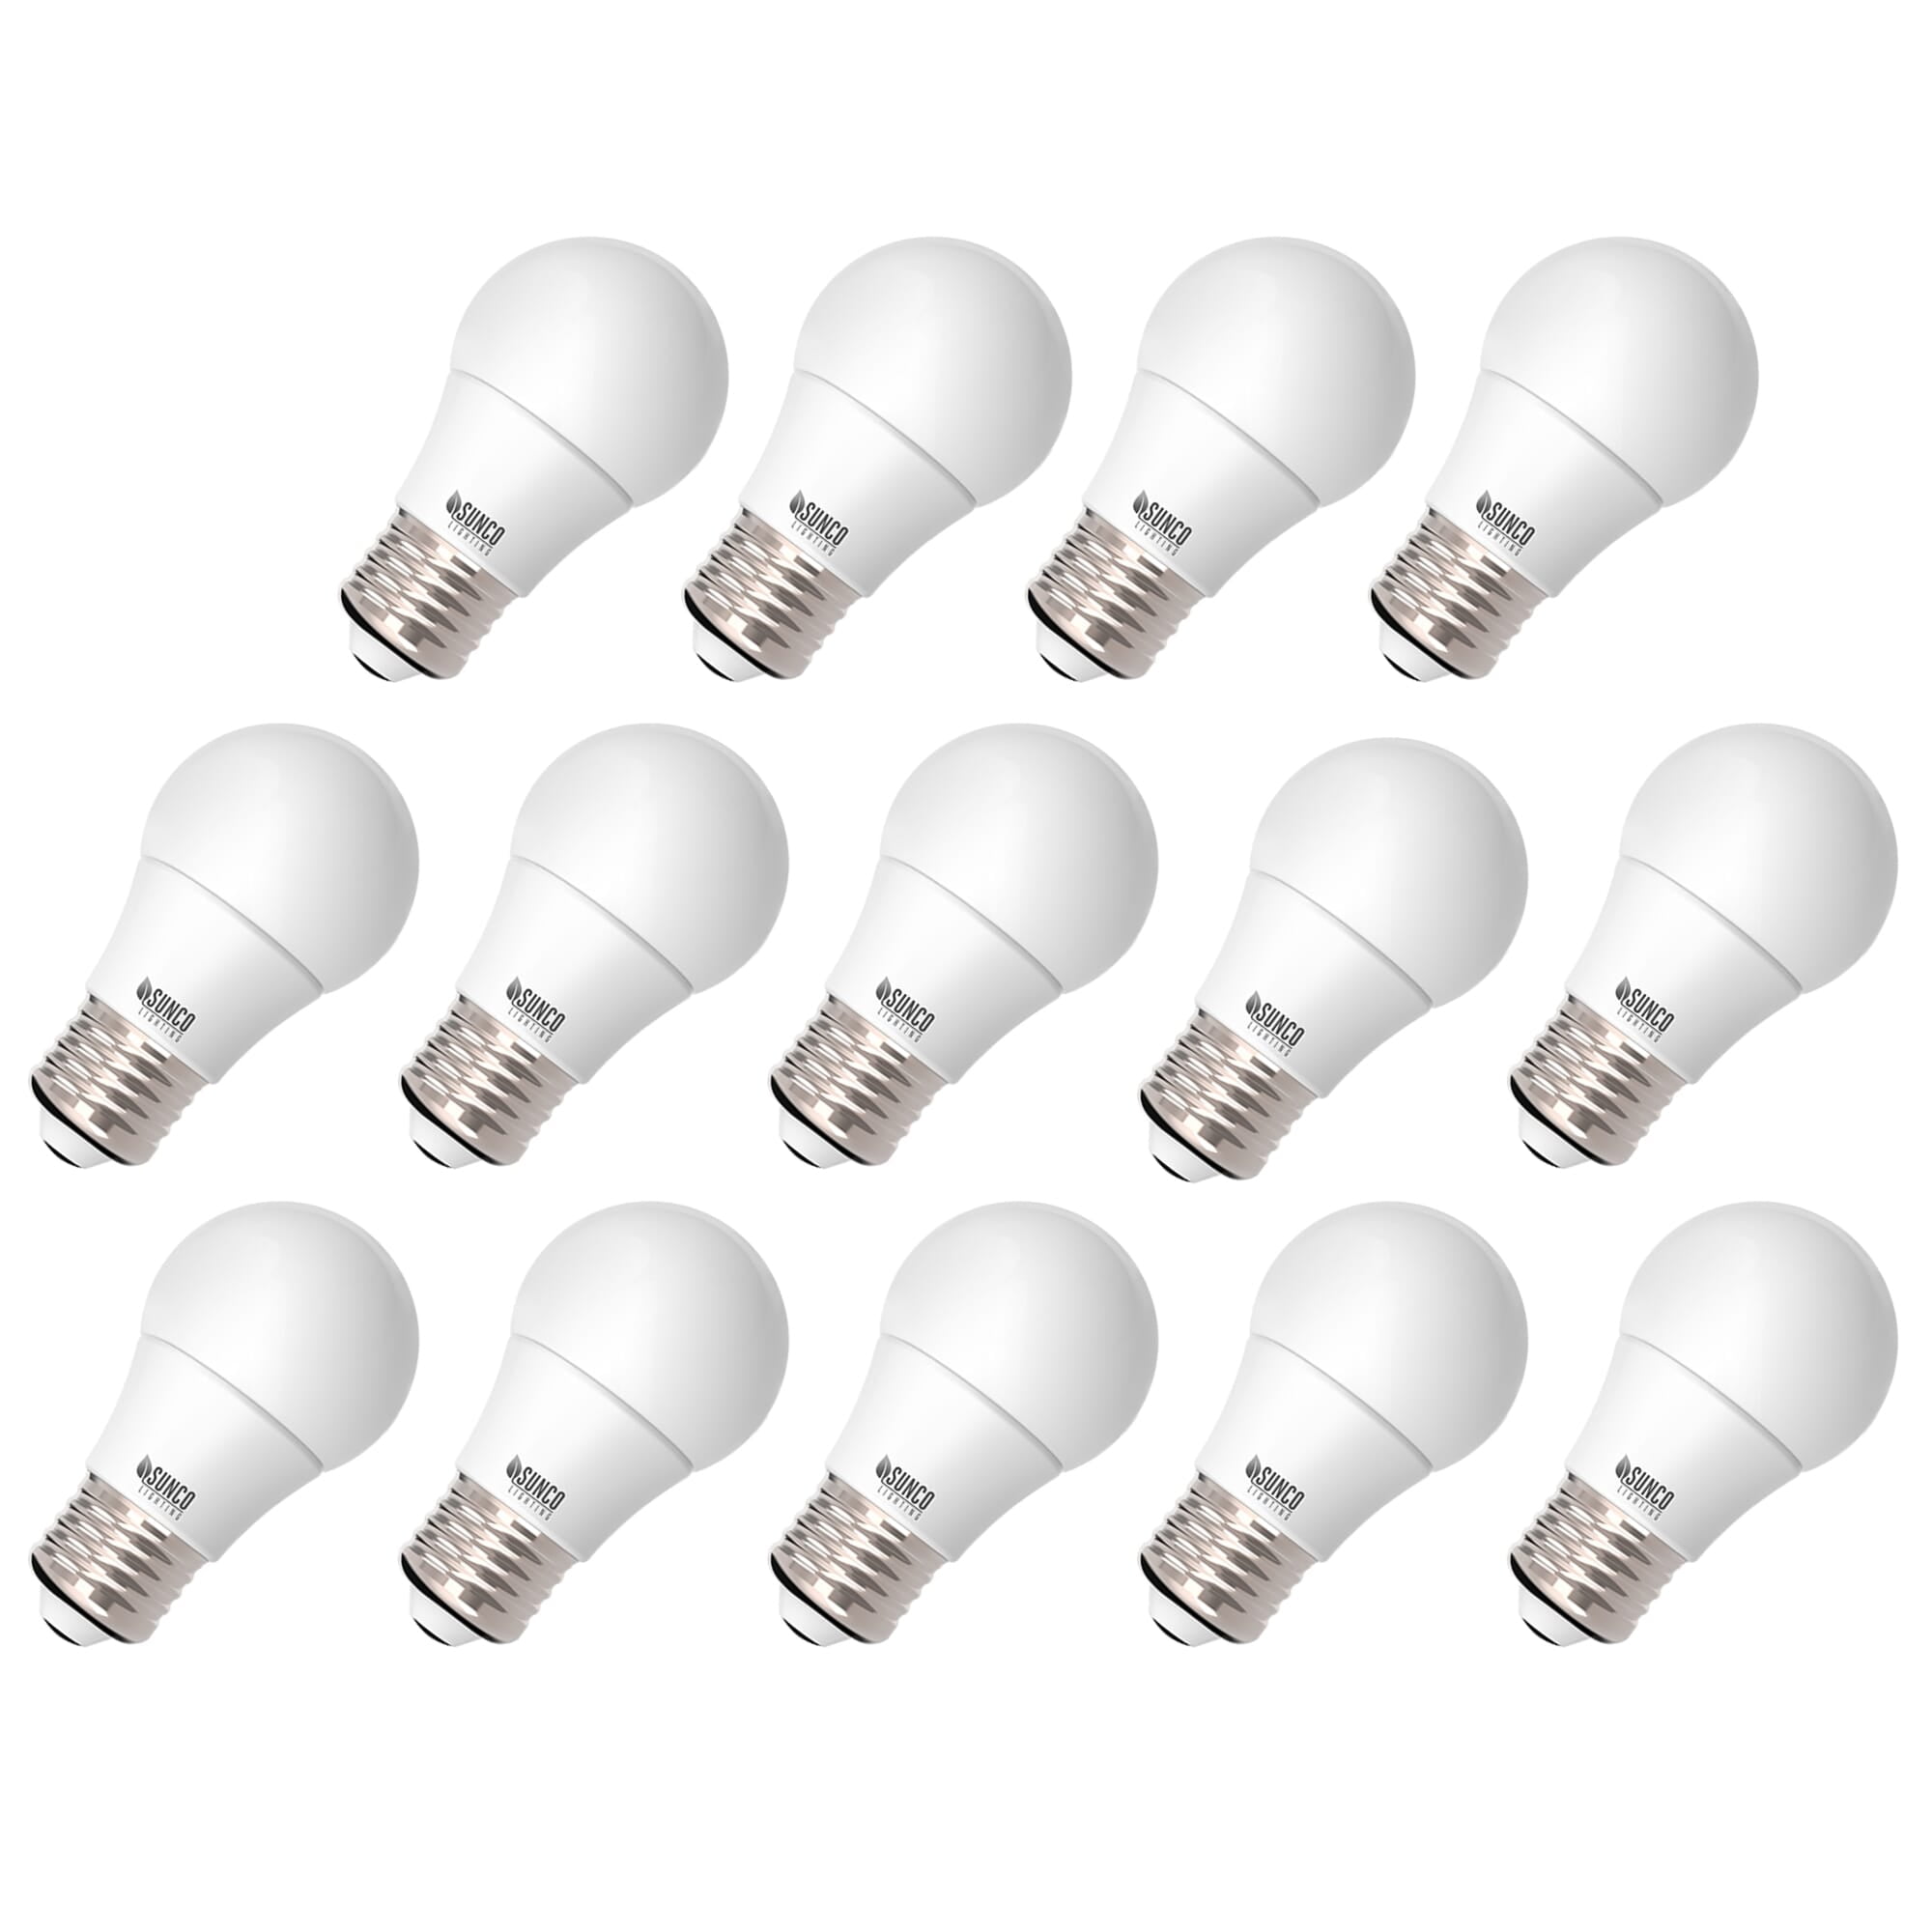 E26 Dimmable LED Bulb JandCase A19 Light Bulbs Home/Office Lighting for Bedroom 50W Equivalent E26 Base Bathroom Ceiling Fan 6.5W 550LM Chandelier Daylight White 5000k Pack of 6 